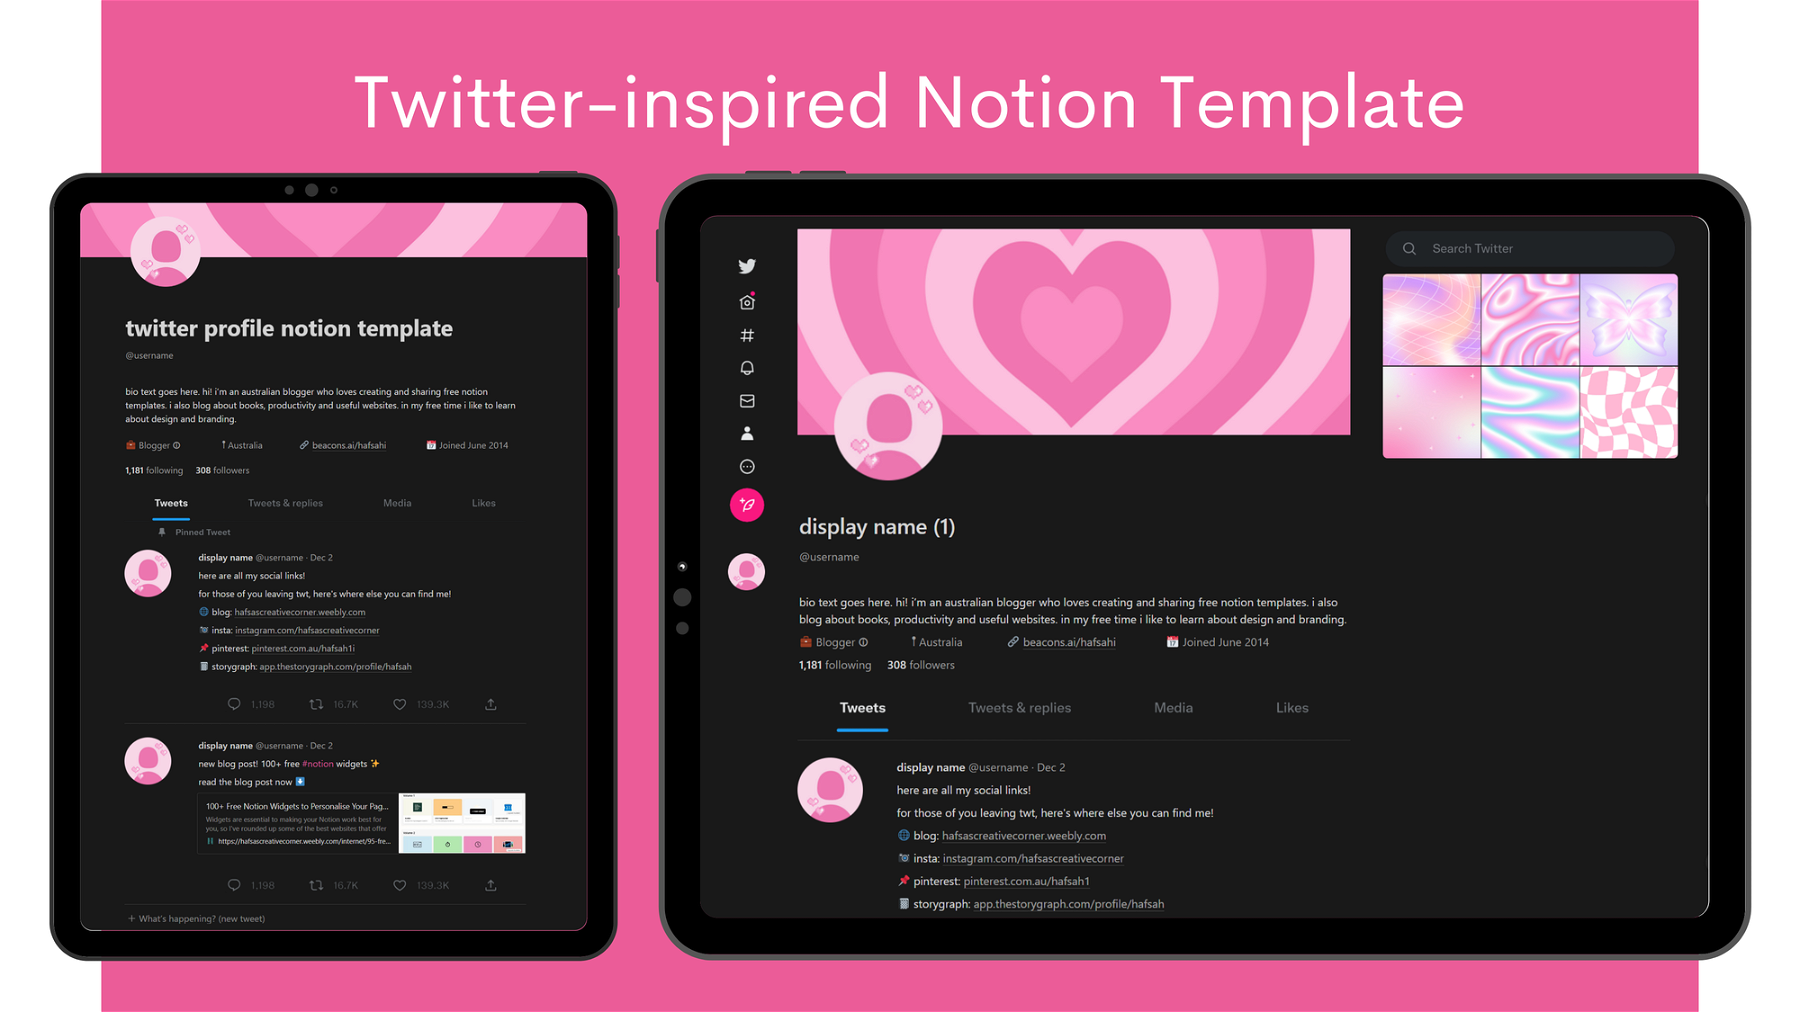 Twitter-Inspired Notion Template